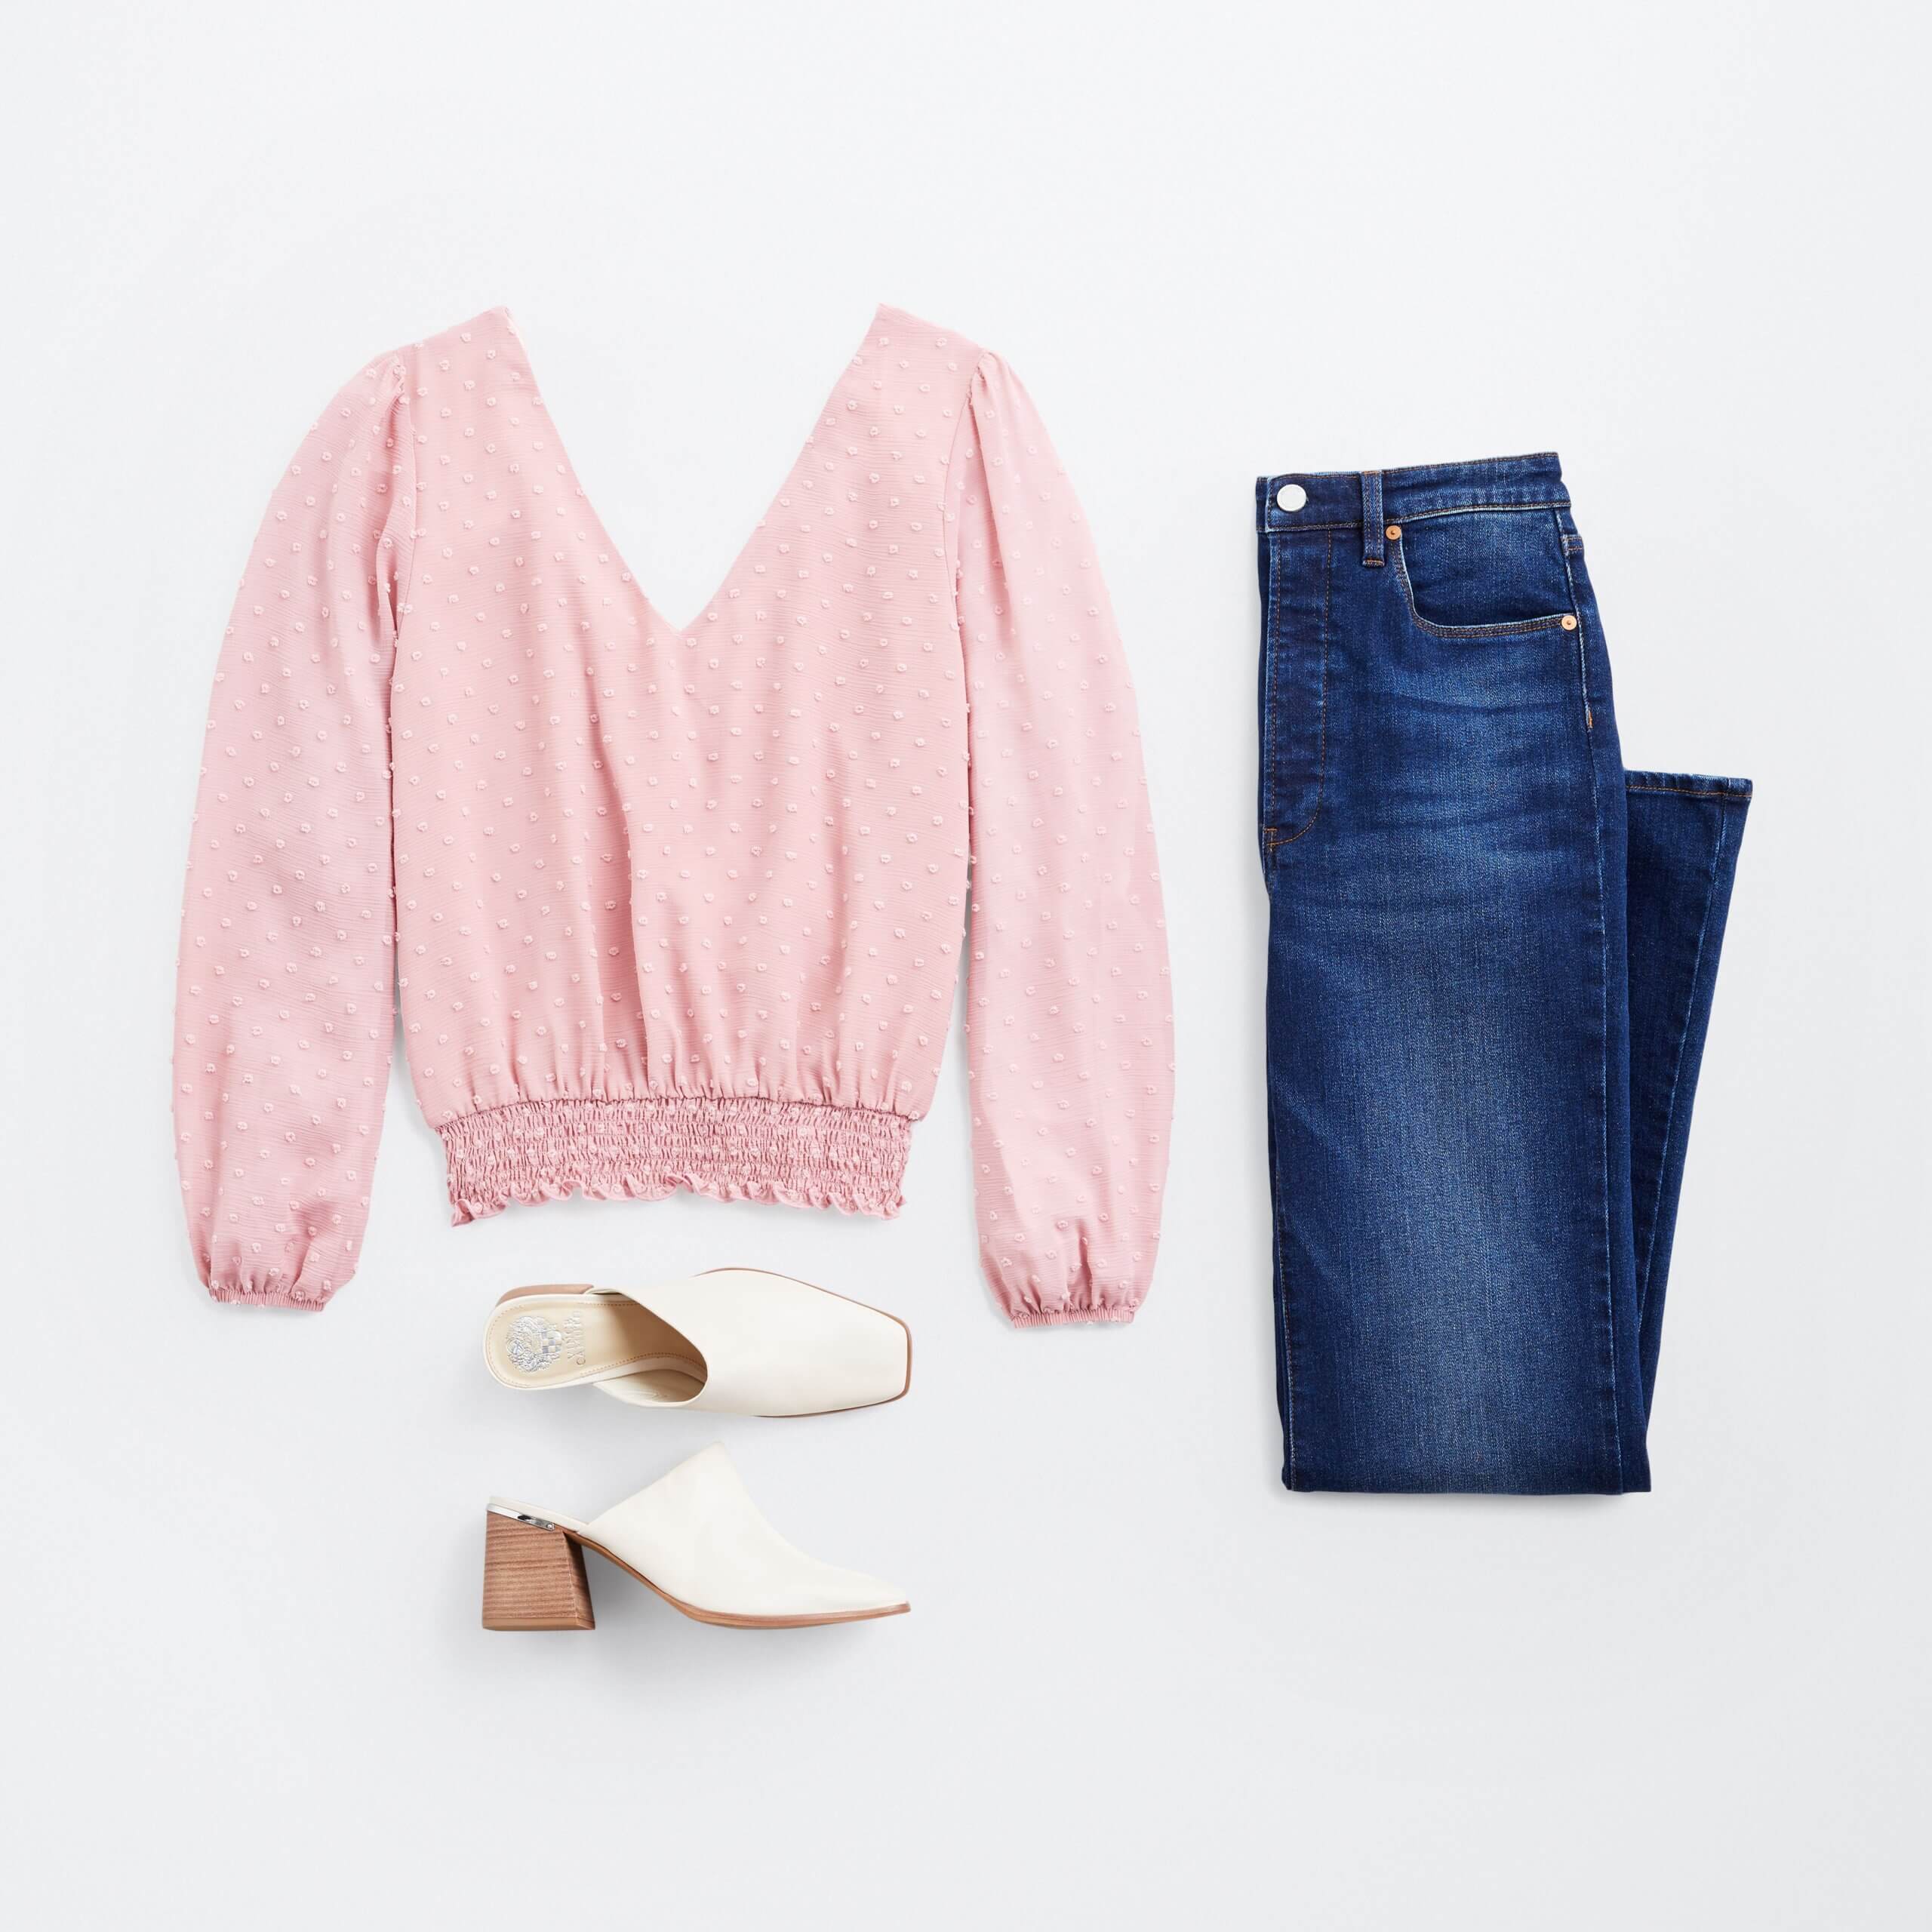 Stitch Fix women's outfit laydown featuring pink cinched-waist top, dark wash denim and mule heels. 